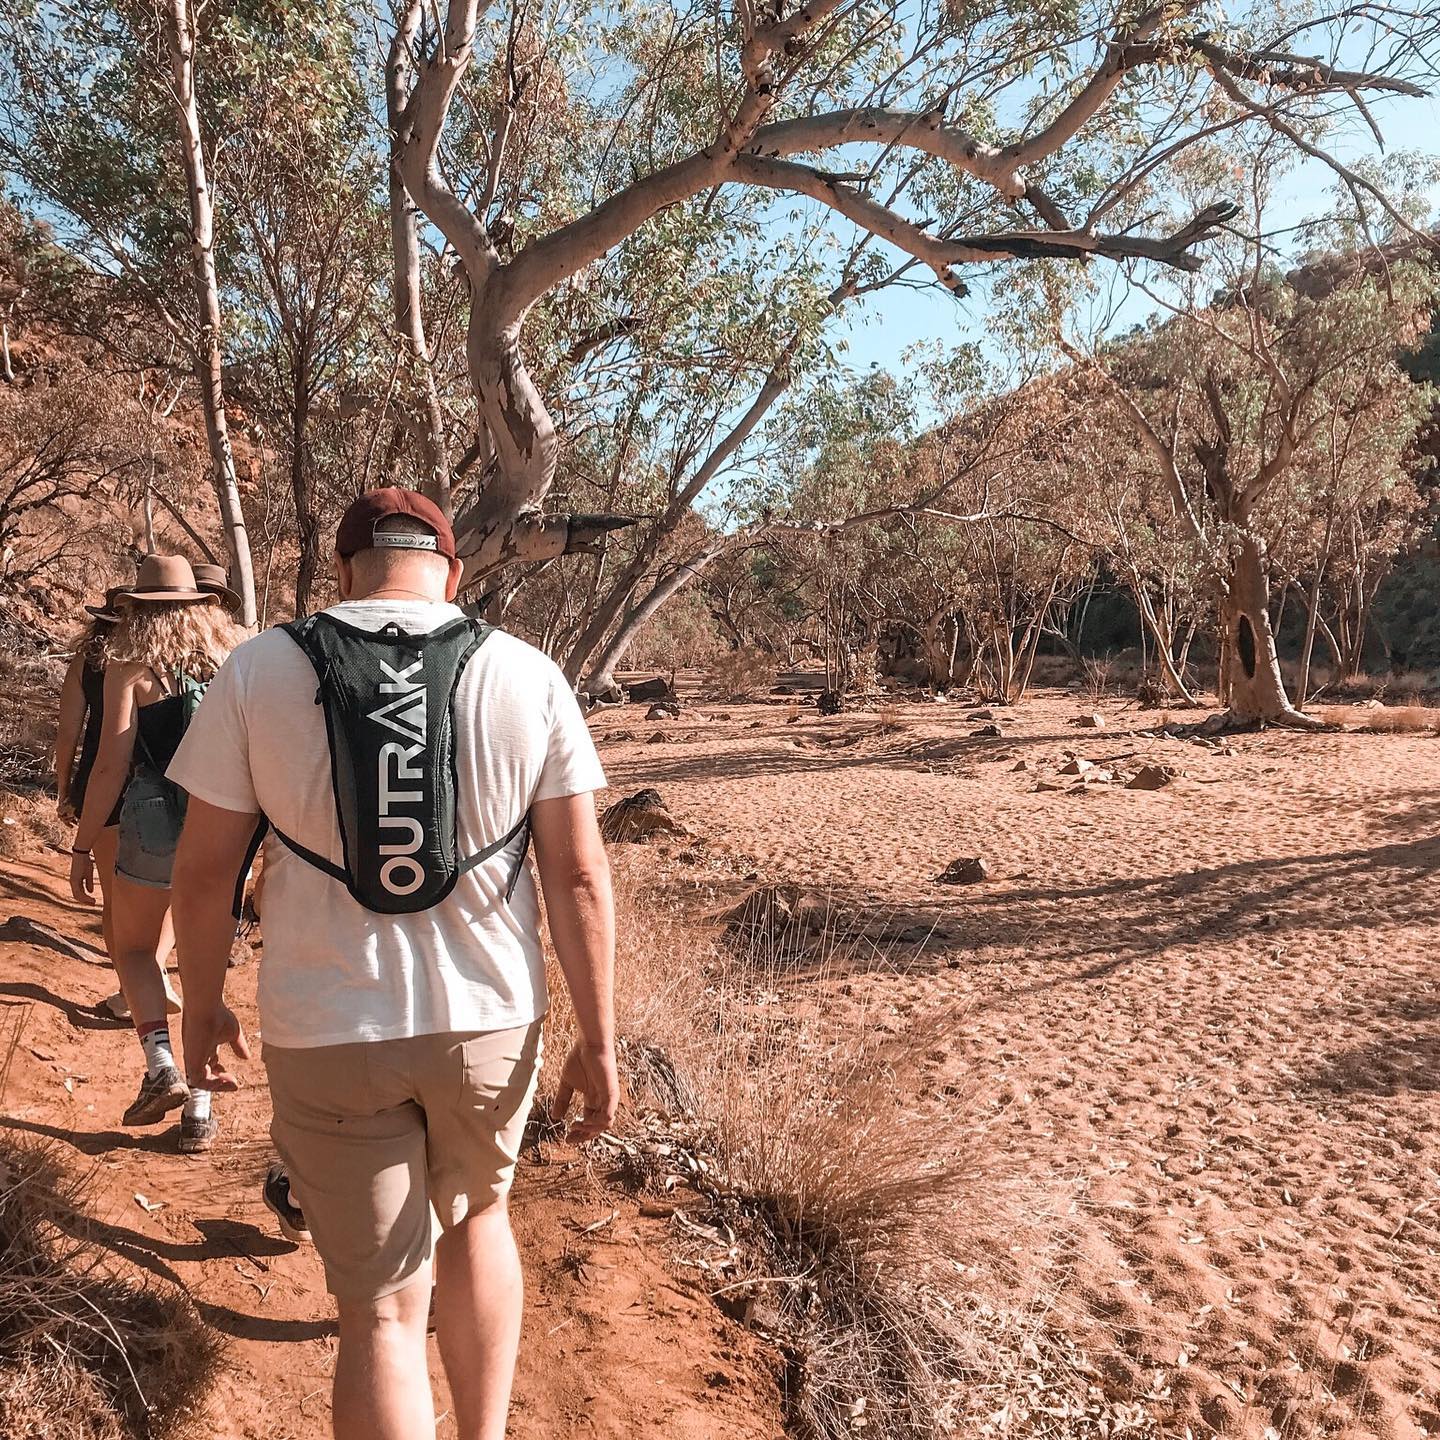 Beautiful things take time to get to... Just like this throwback of @intrepidtravel’s red centre trip as we hiked up a river bed to get to some beautiful swiming holes in the West MacDonnell National Park.

#beintrepid #intrepidtravel #nttourism #northernterritory #centralaustralia